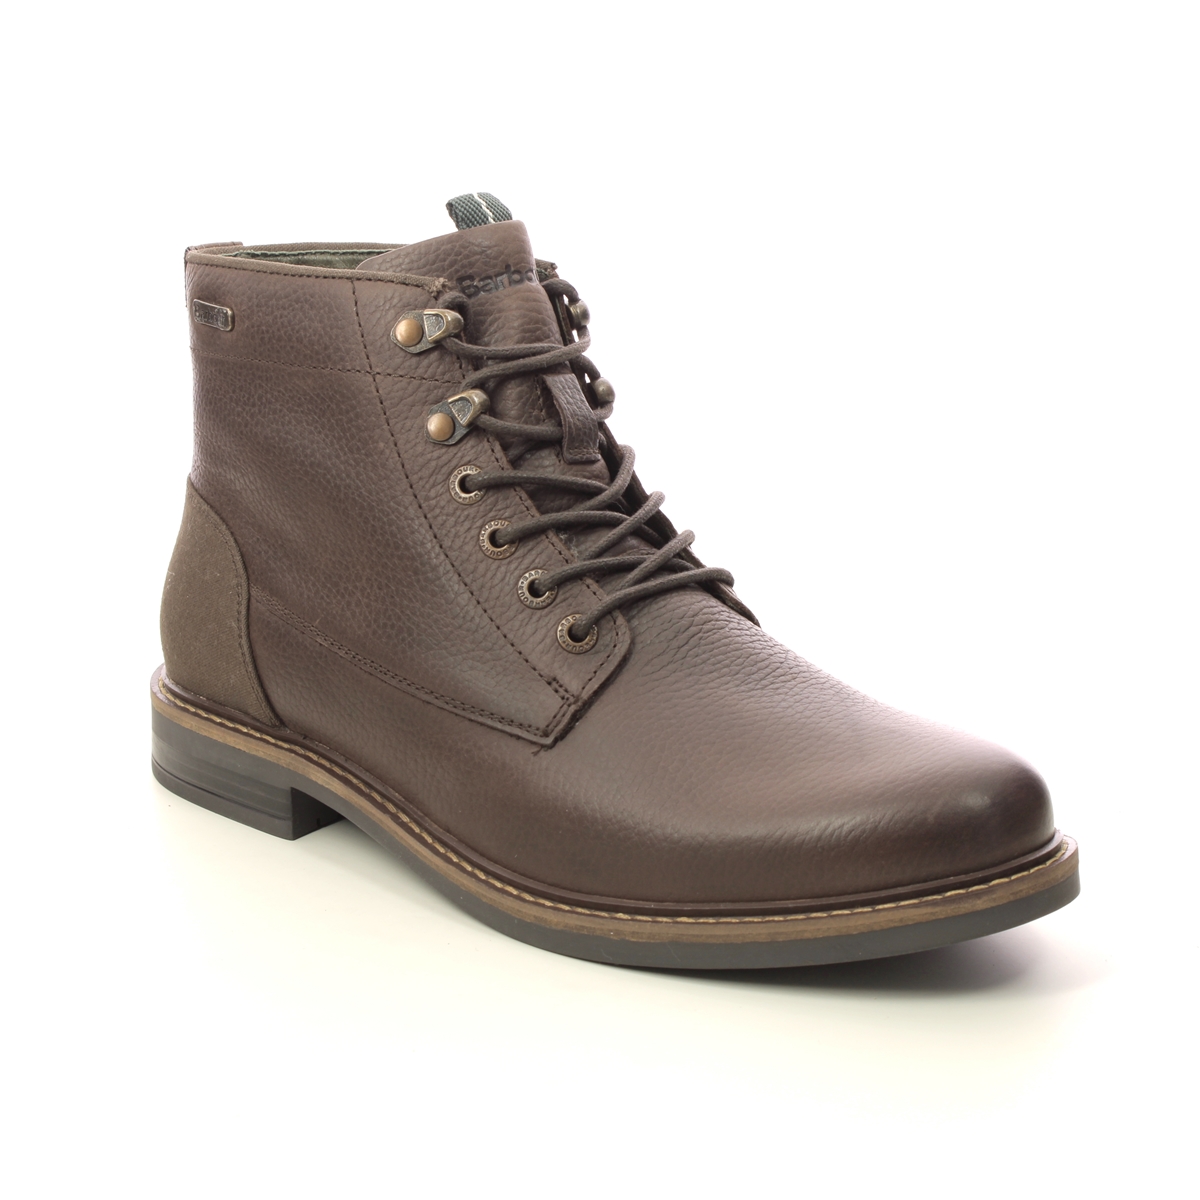 Barbour Deckham Derby Brown Leather Boots Mfo0644-Br77 In Size 9 In Plain Brown Leather